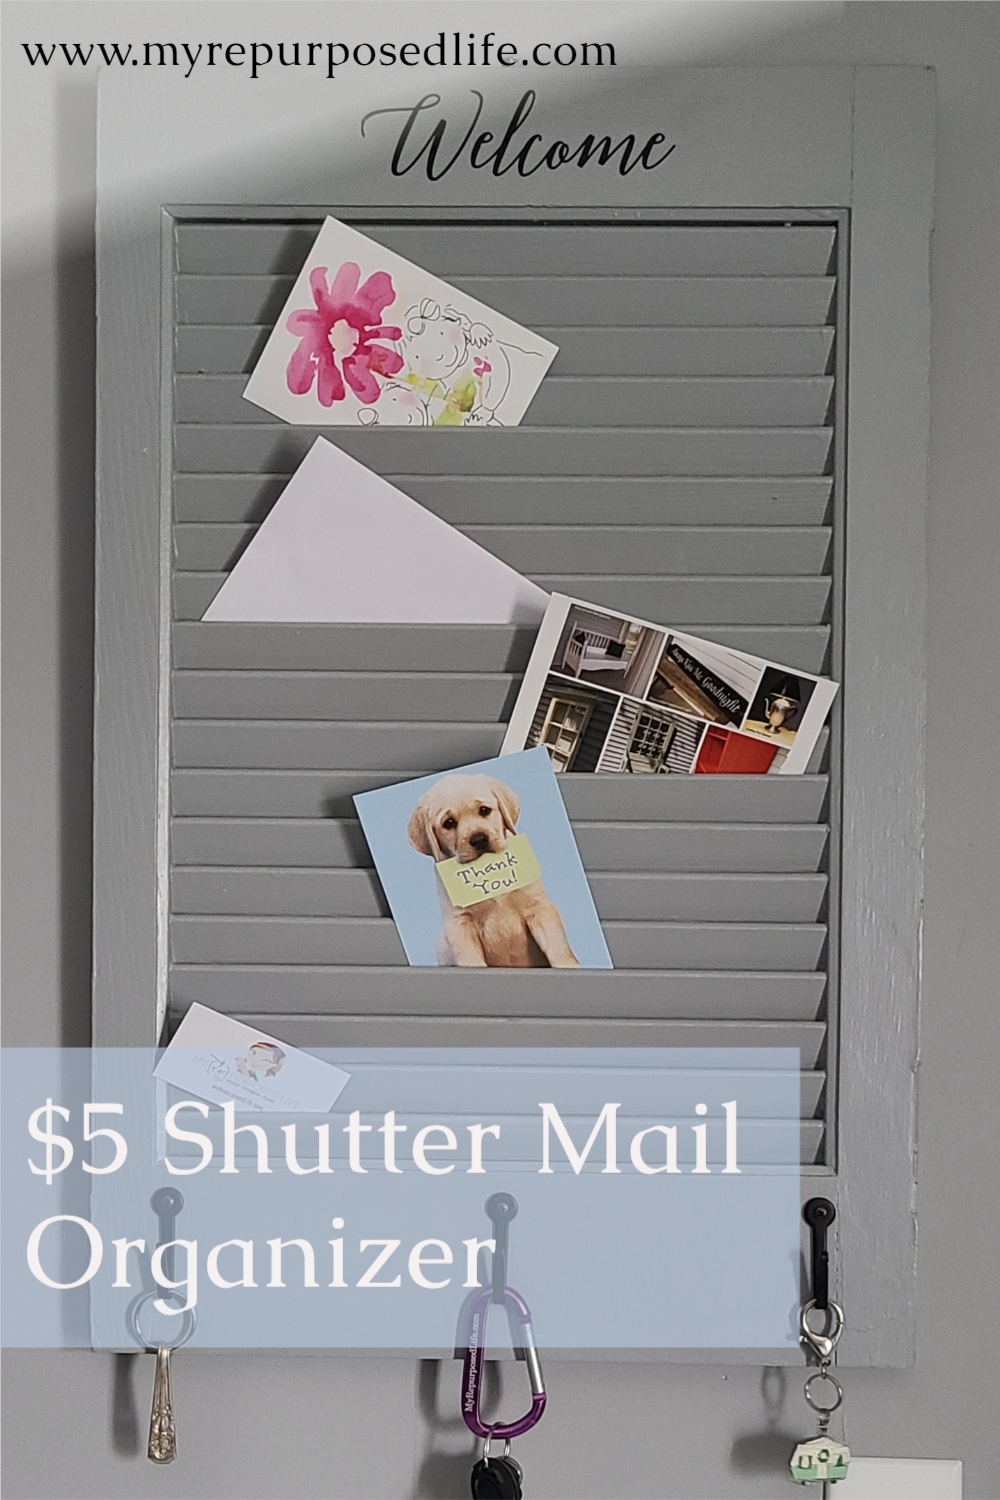 This $5 shutter gets a new purpose, a mail organizer. This is THE easiest shutter project you will ever find. No wood, no sawing. The secret is cardboard and hot glue. #MyRepurposedLife #repurposed #upcycled #shutter #mailorganizer #diy #easy via @repurposedlife